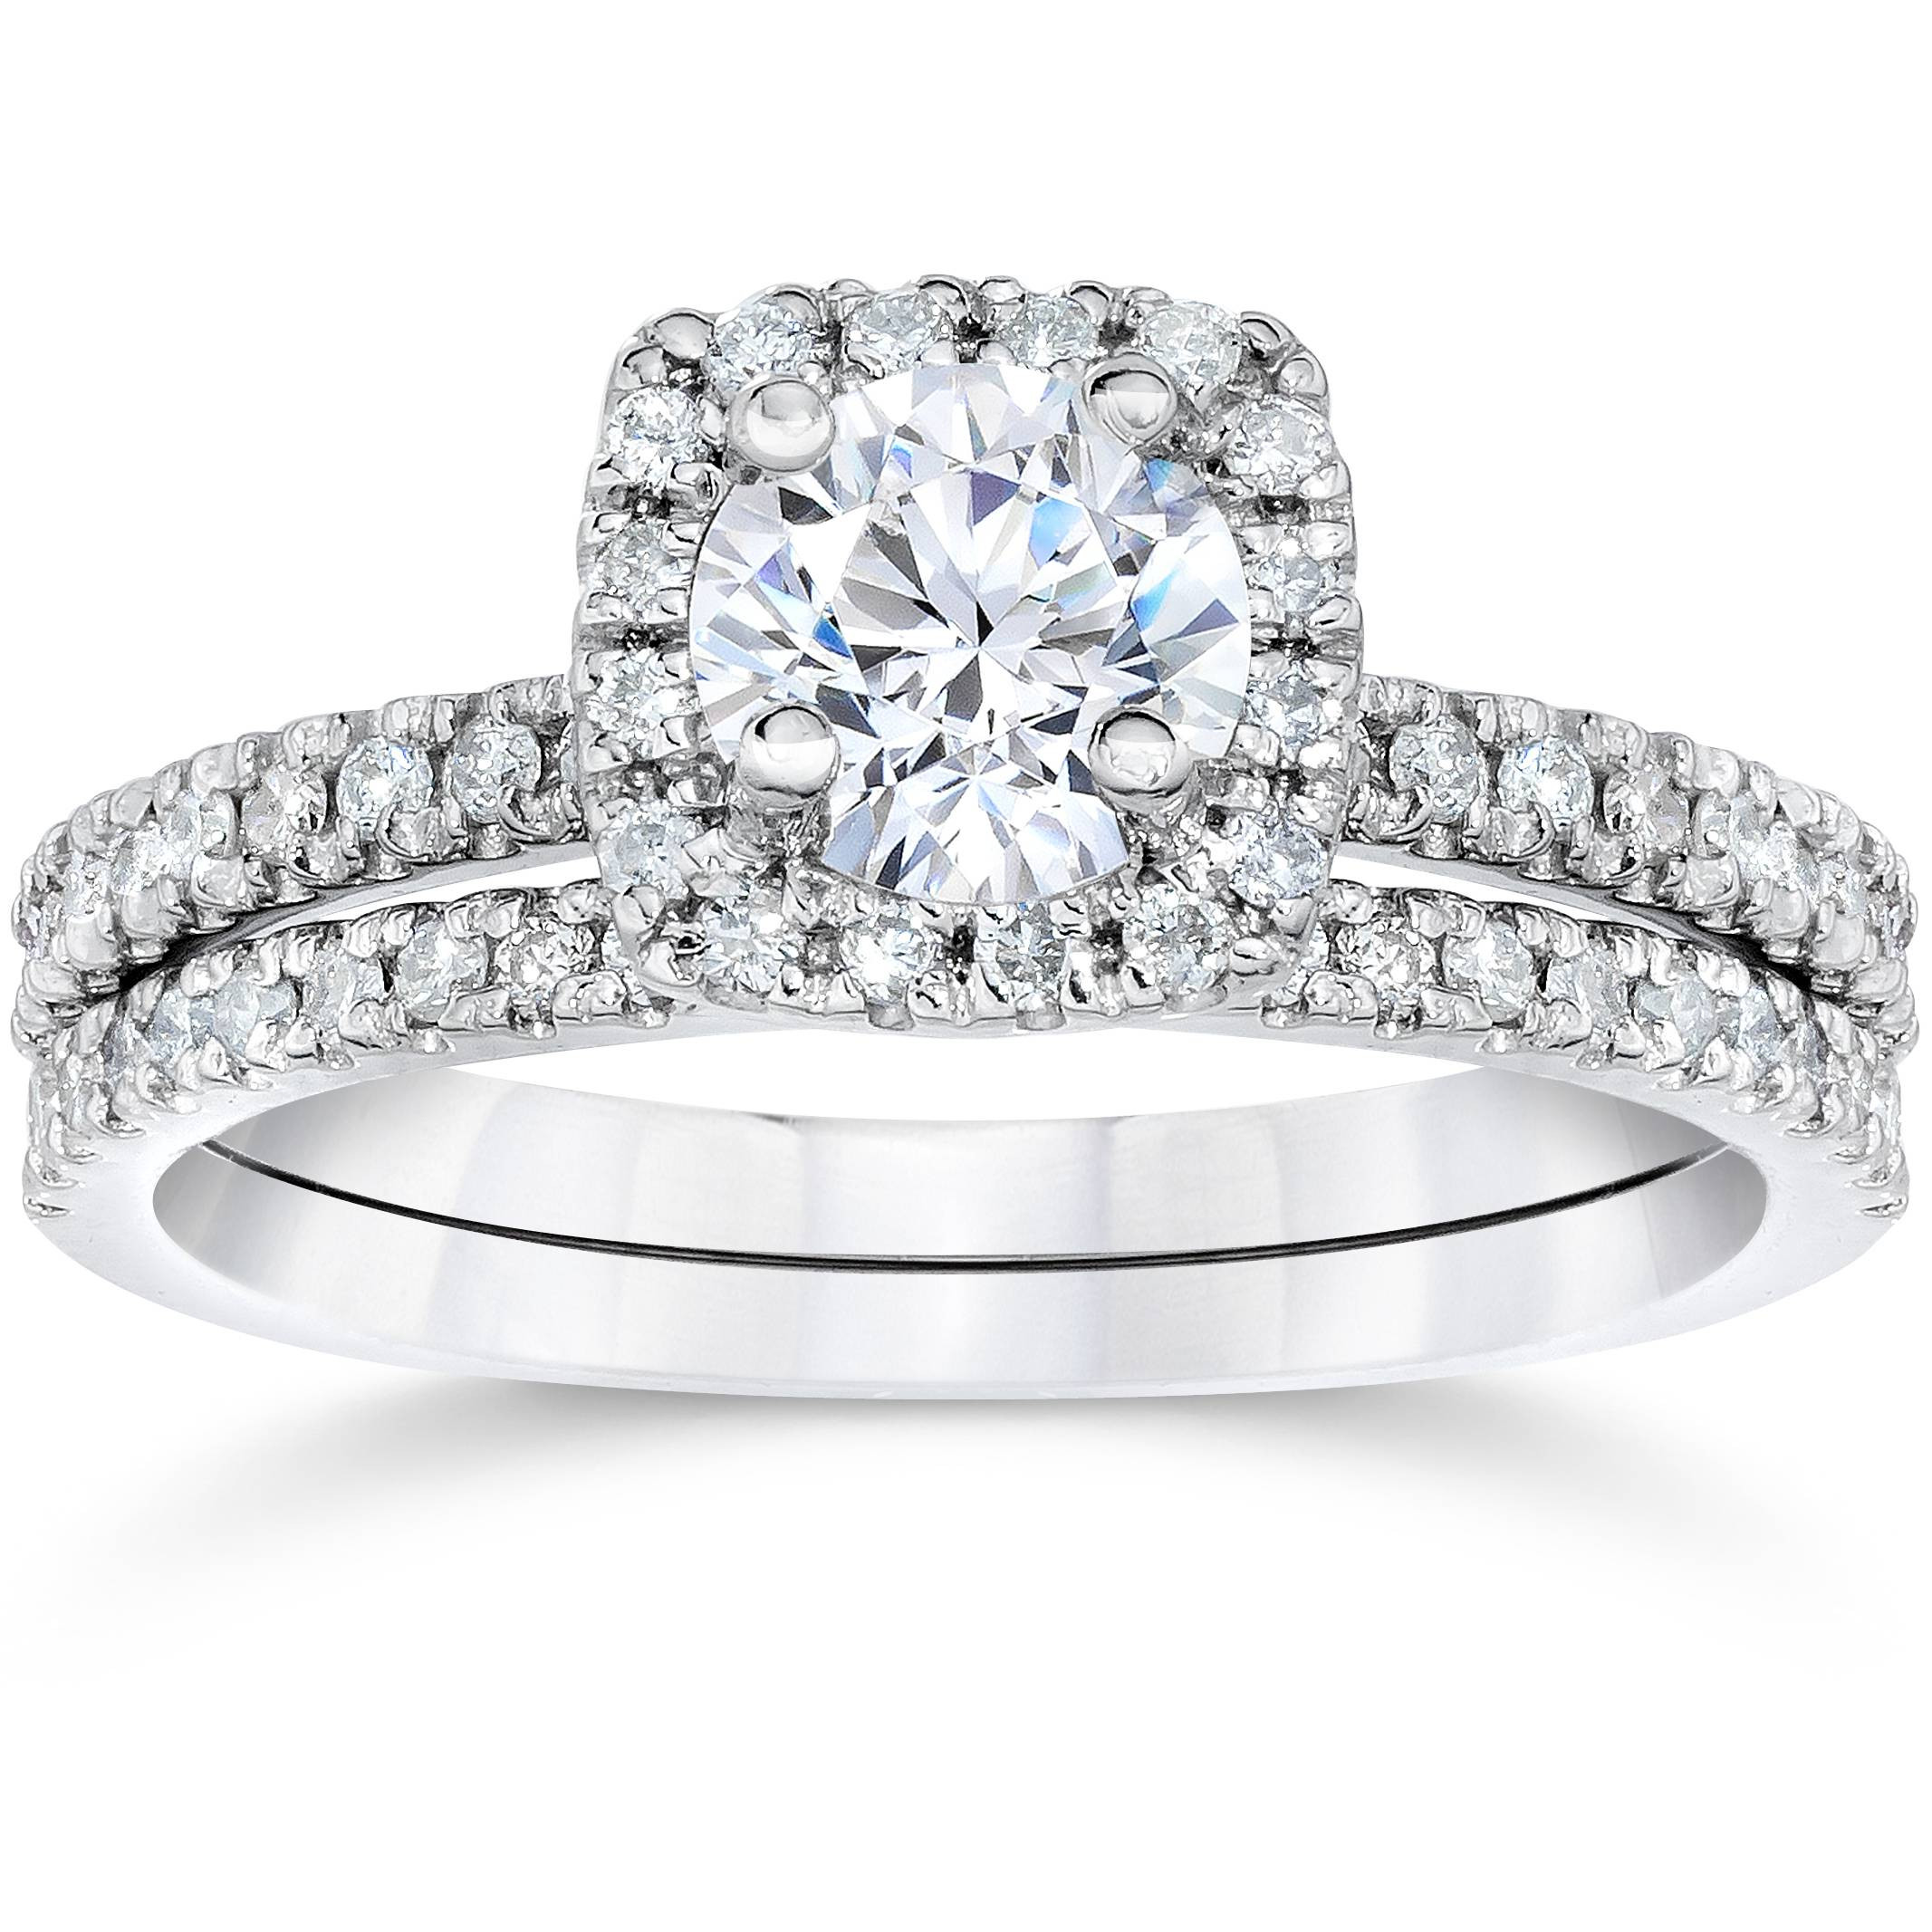 Solitaire Wedding Ring Sets
 5 8Ct Cushion Halo Real Diamond Engagement Wedding Ring